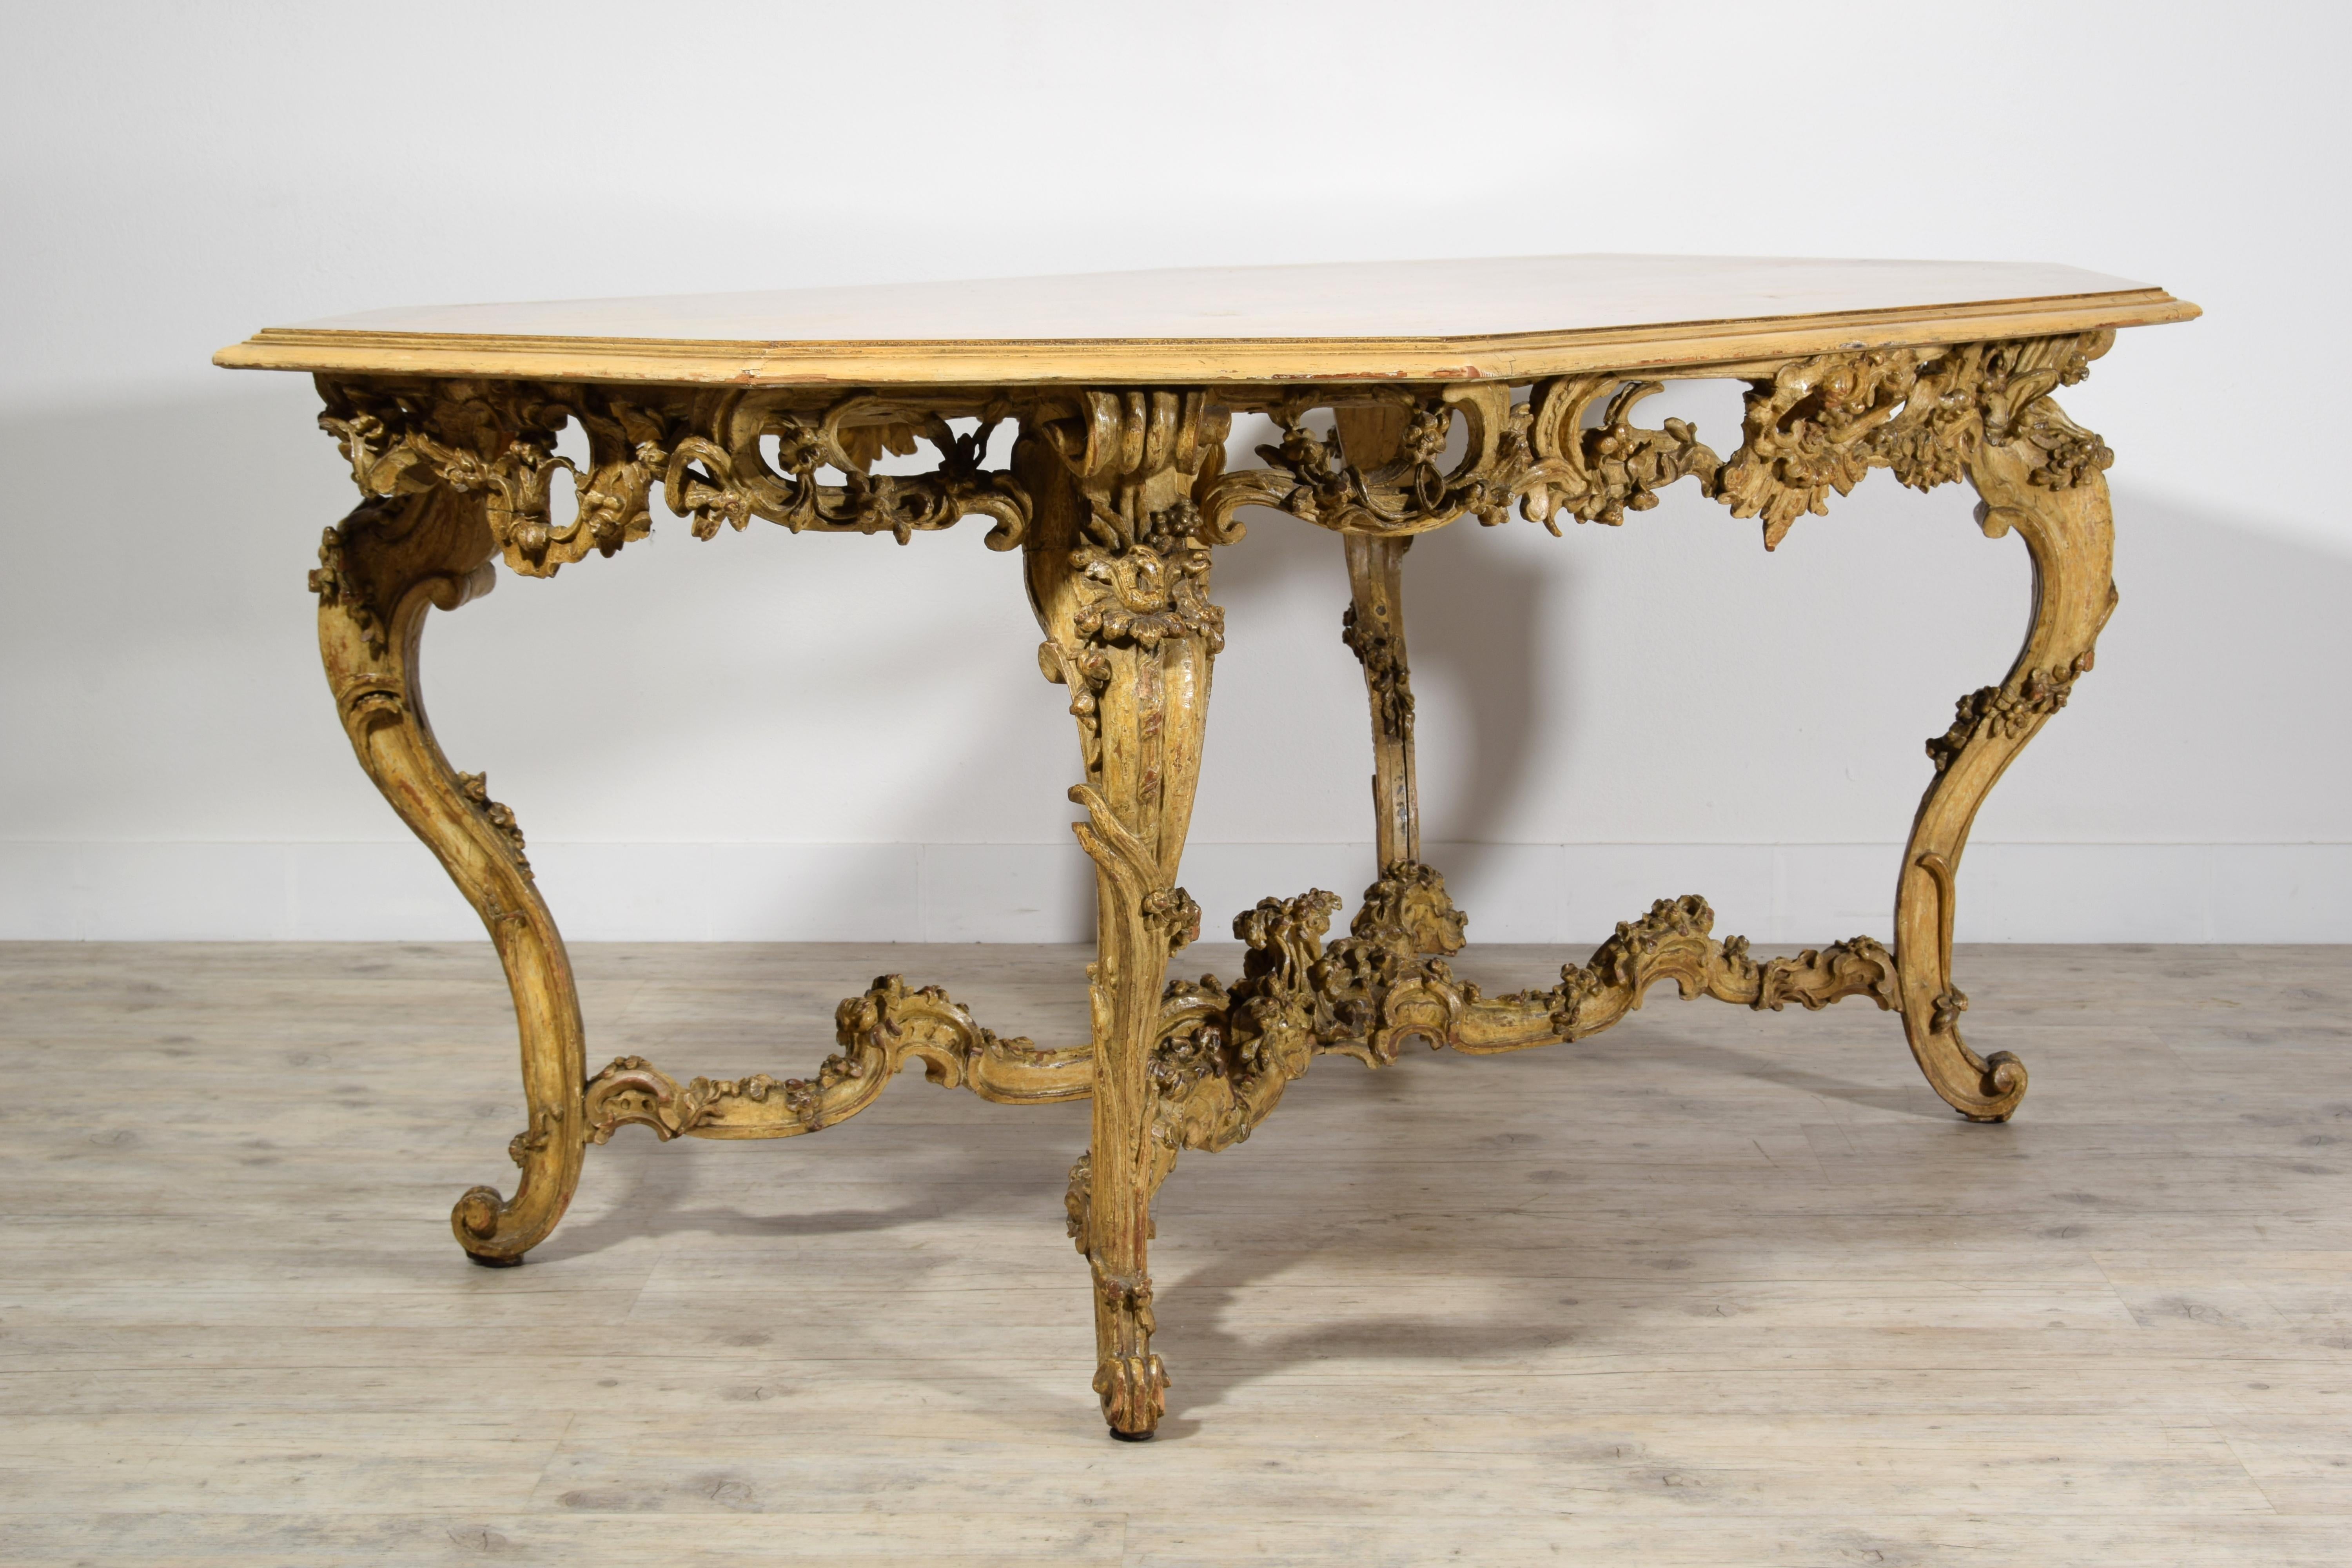 Italian Baroque Carved Gilt and Lacquered Wood Center Table, 18th Century For Sale 13